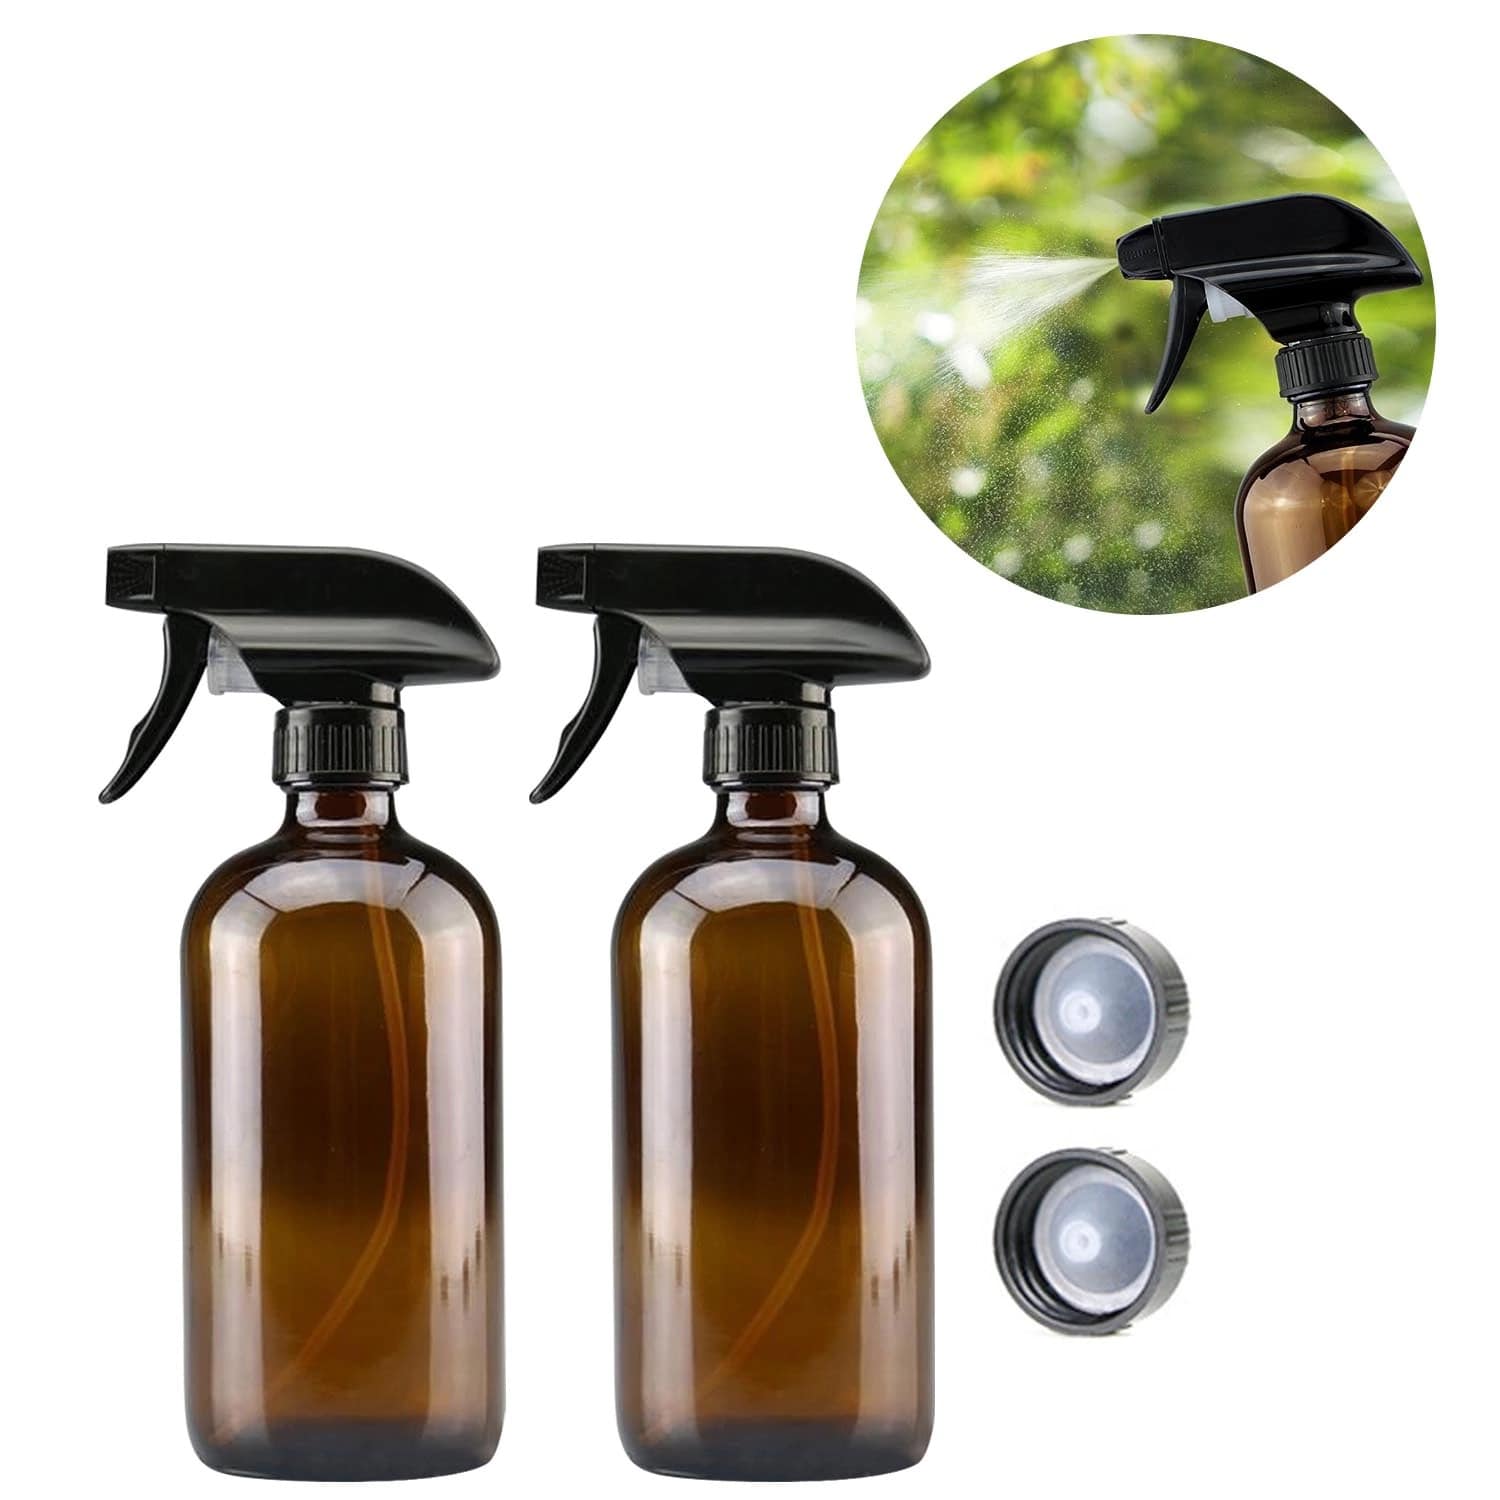 Two (2) 500ml (16oz) Amber Glass Spray Bottles for Homemade Cleaning  Solutions - Domesblissity